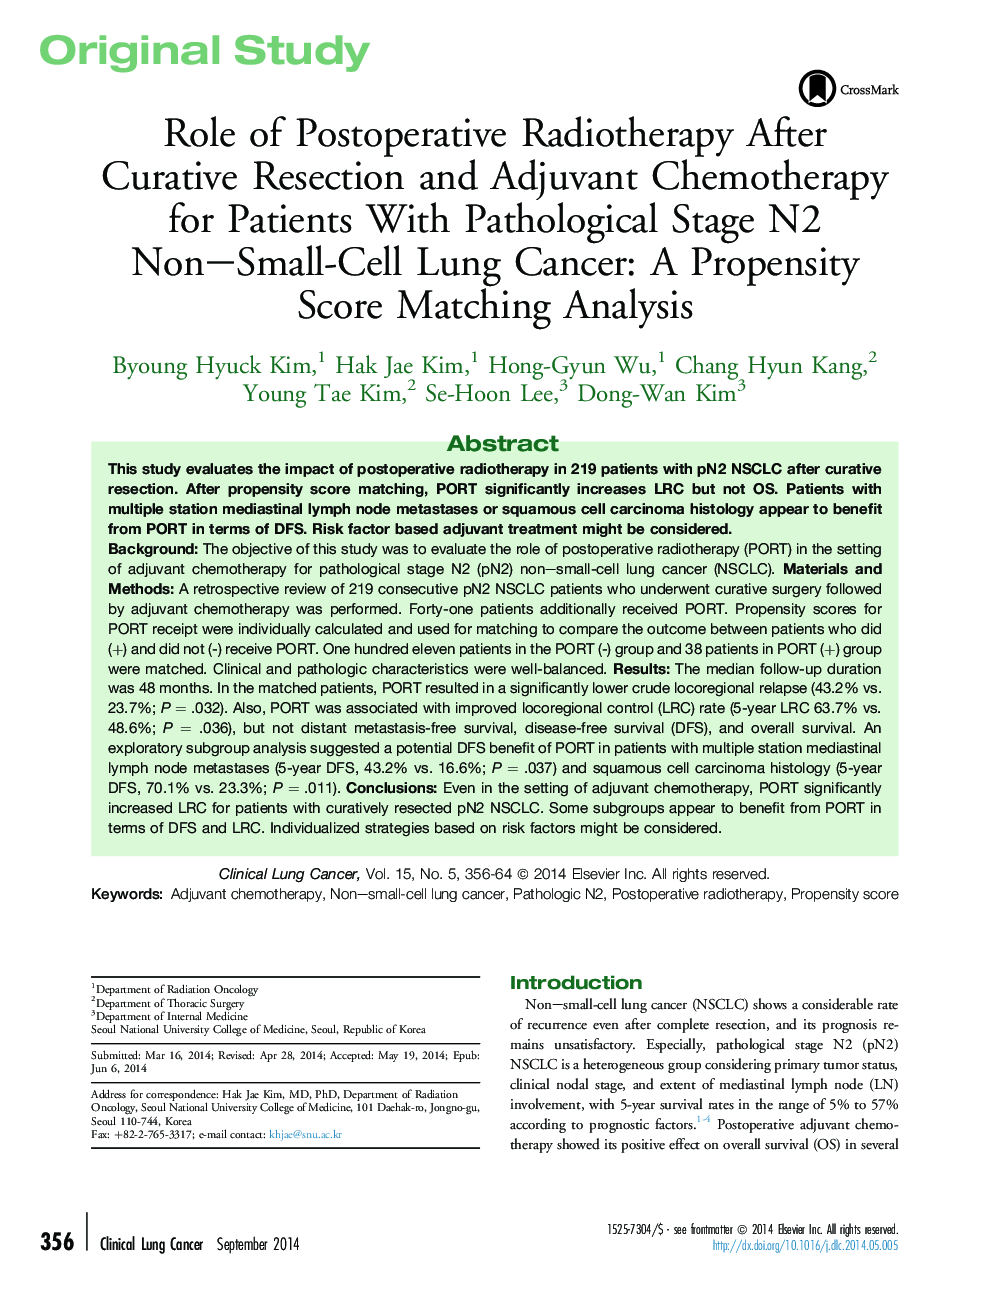 Role of Postoperative Radiotherapy After Curative Resection and Adjuvant Chemotherapy for Patients With Pathological Stage N2 Non–Small-Cell Lung Cancer: A Propensity Score Matching Analysis